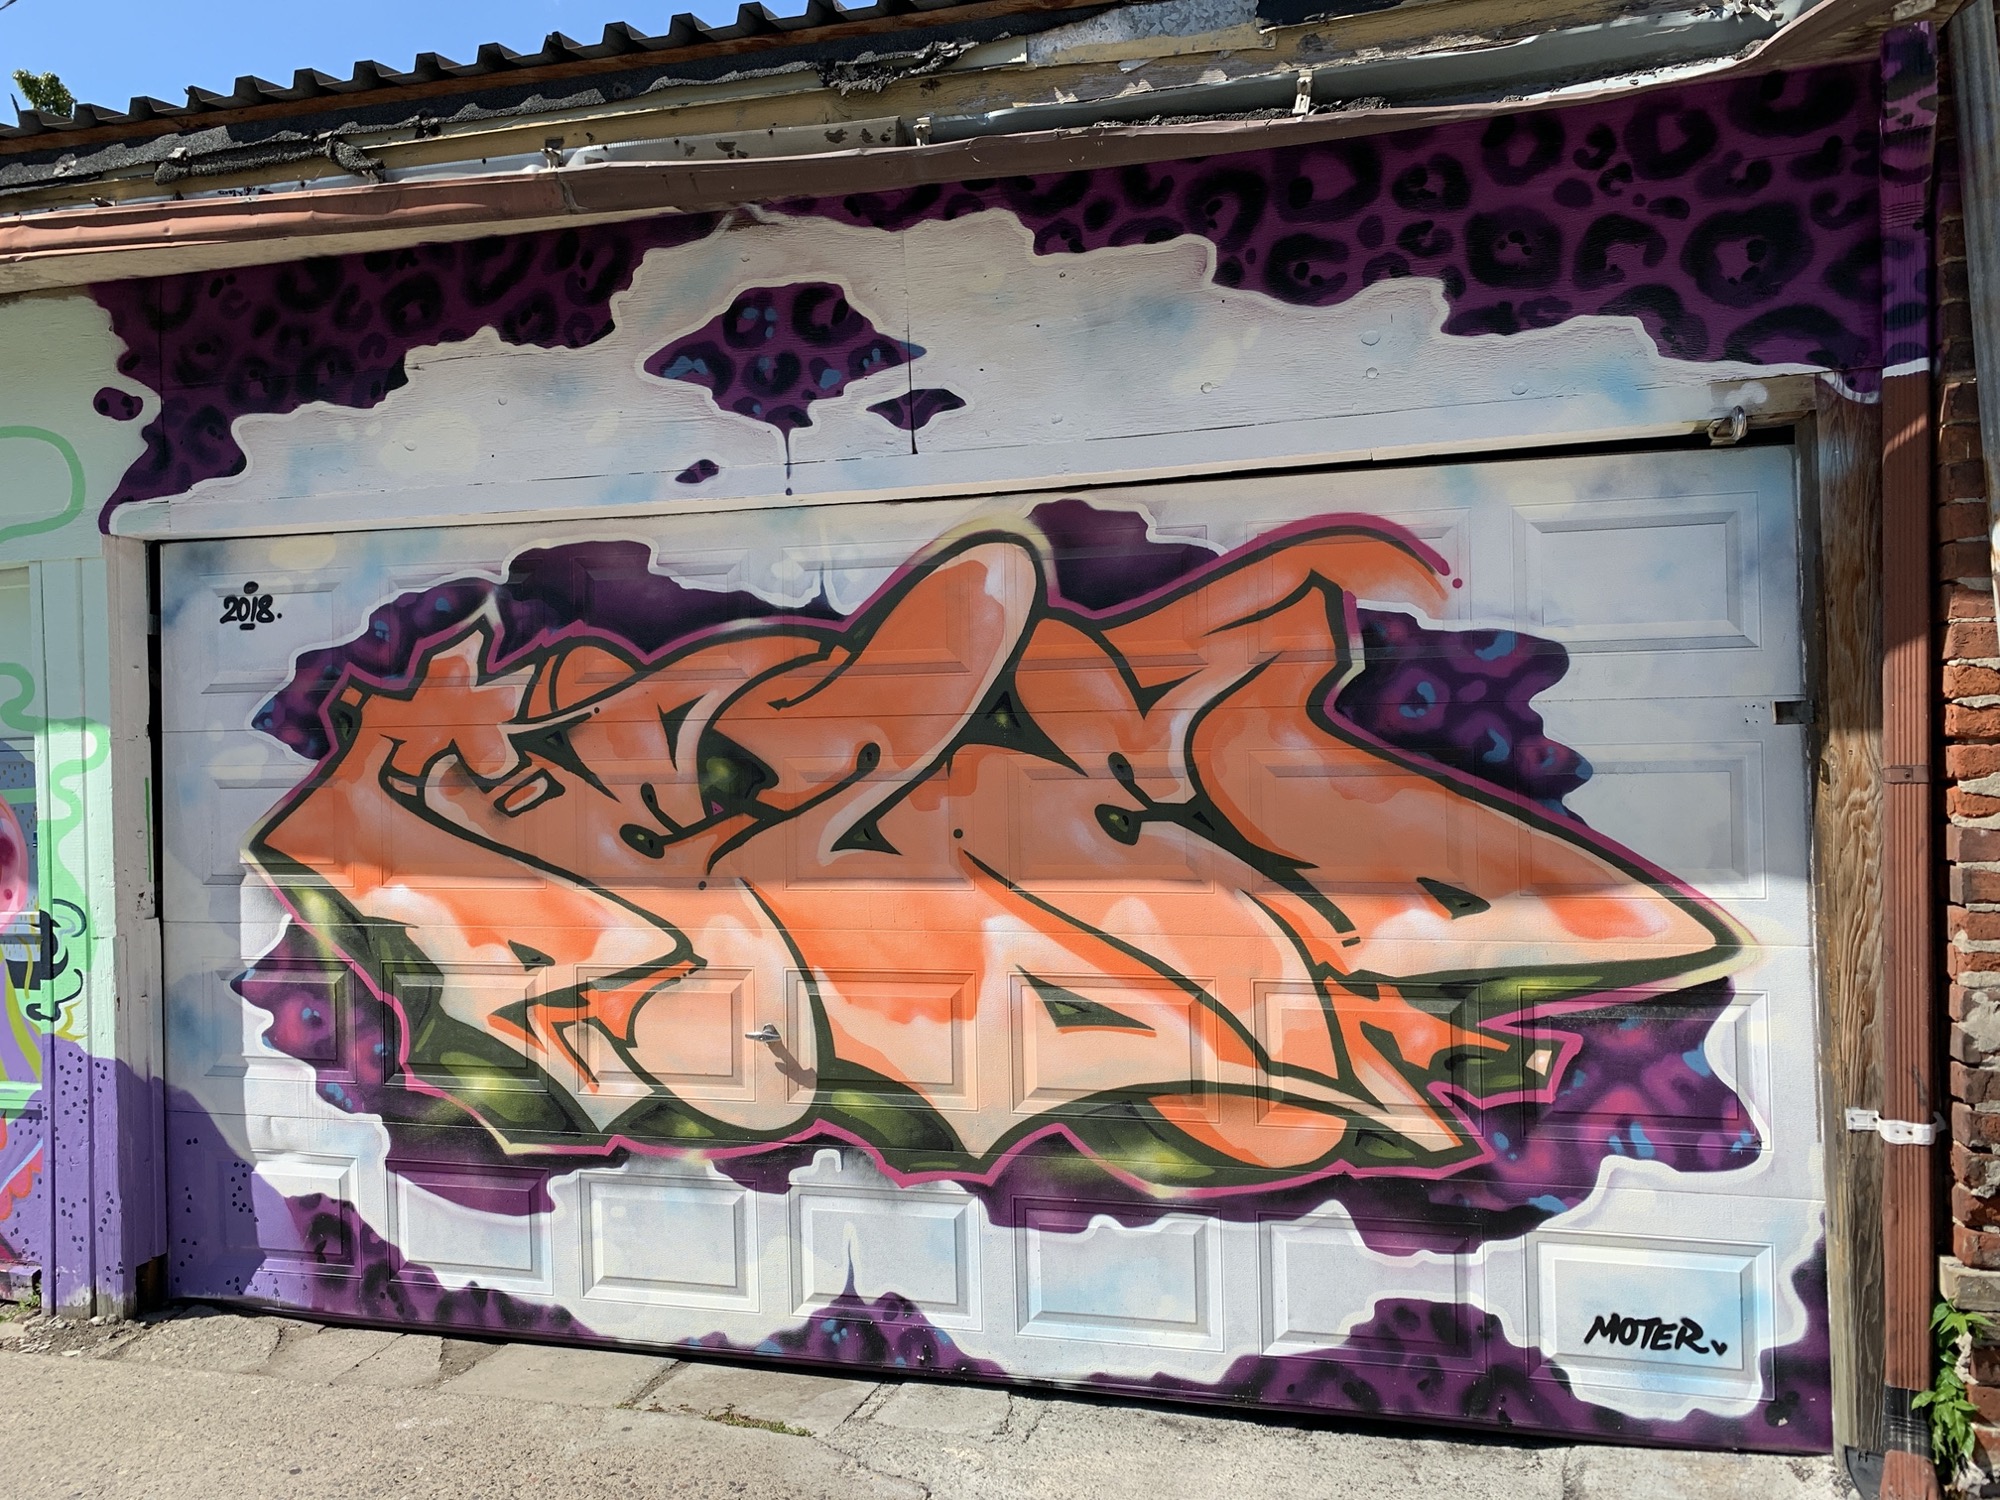 Graffiti 2347  captured by Rabot in Toronto Canada